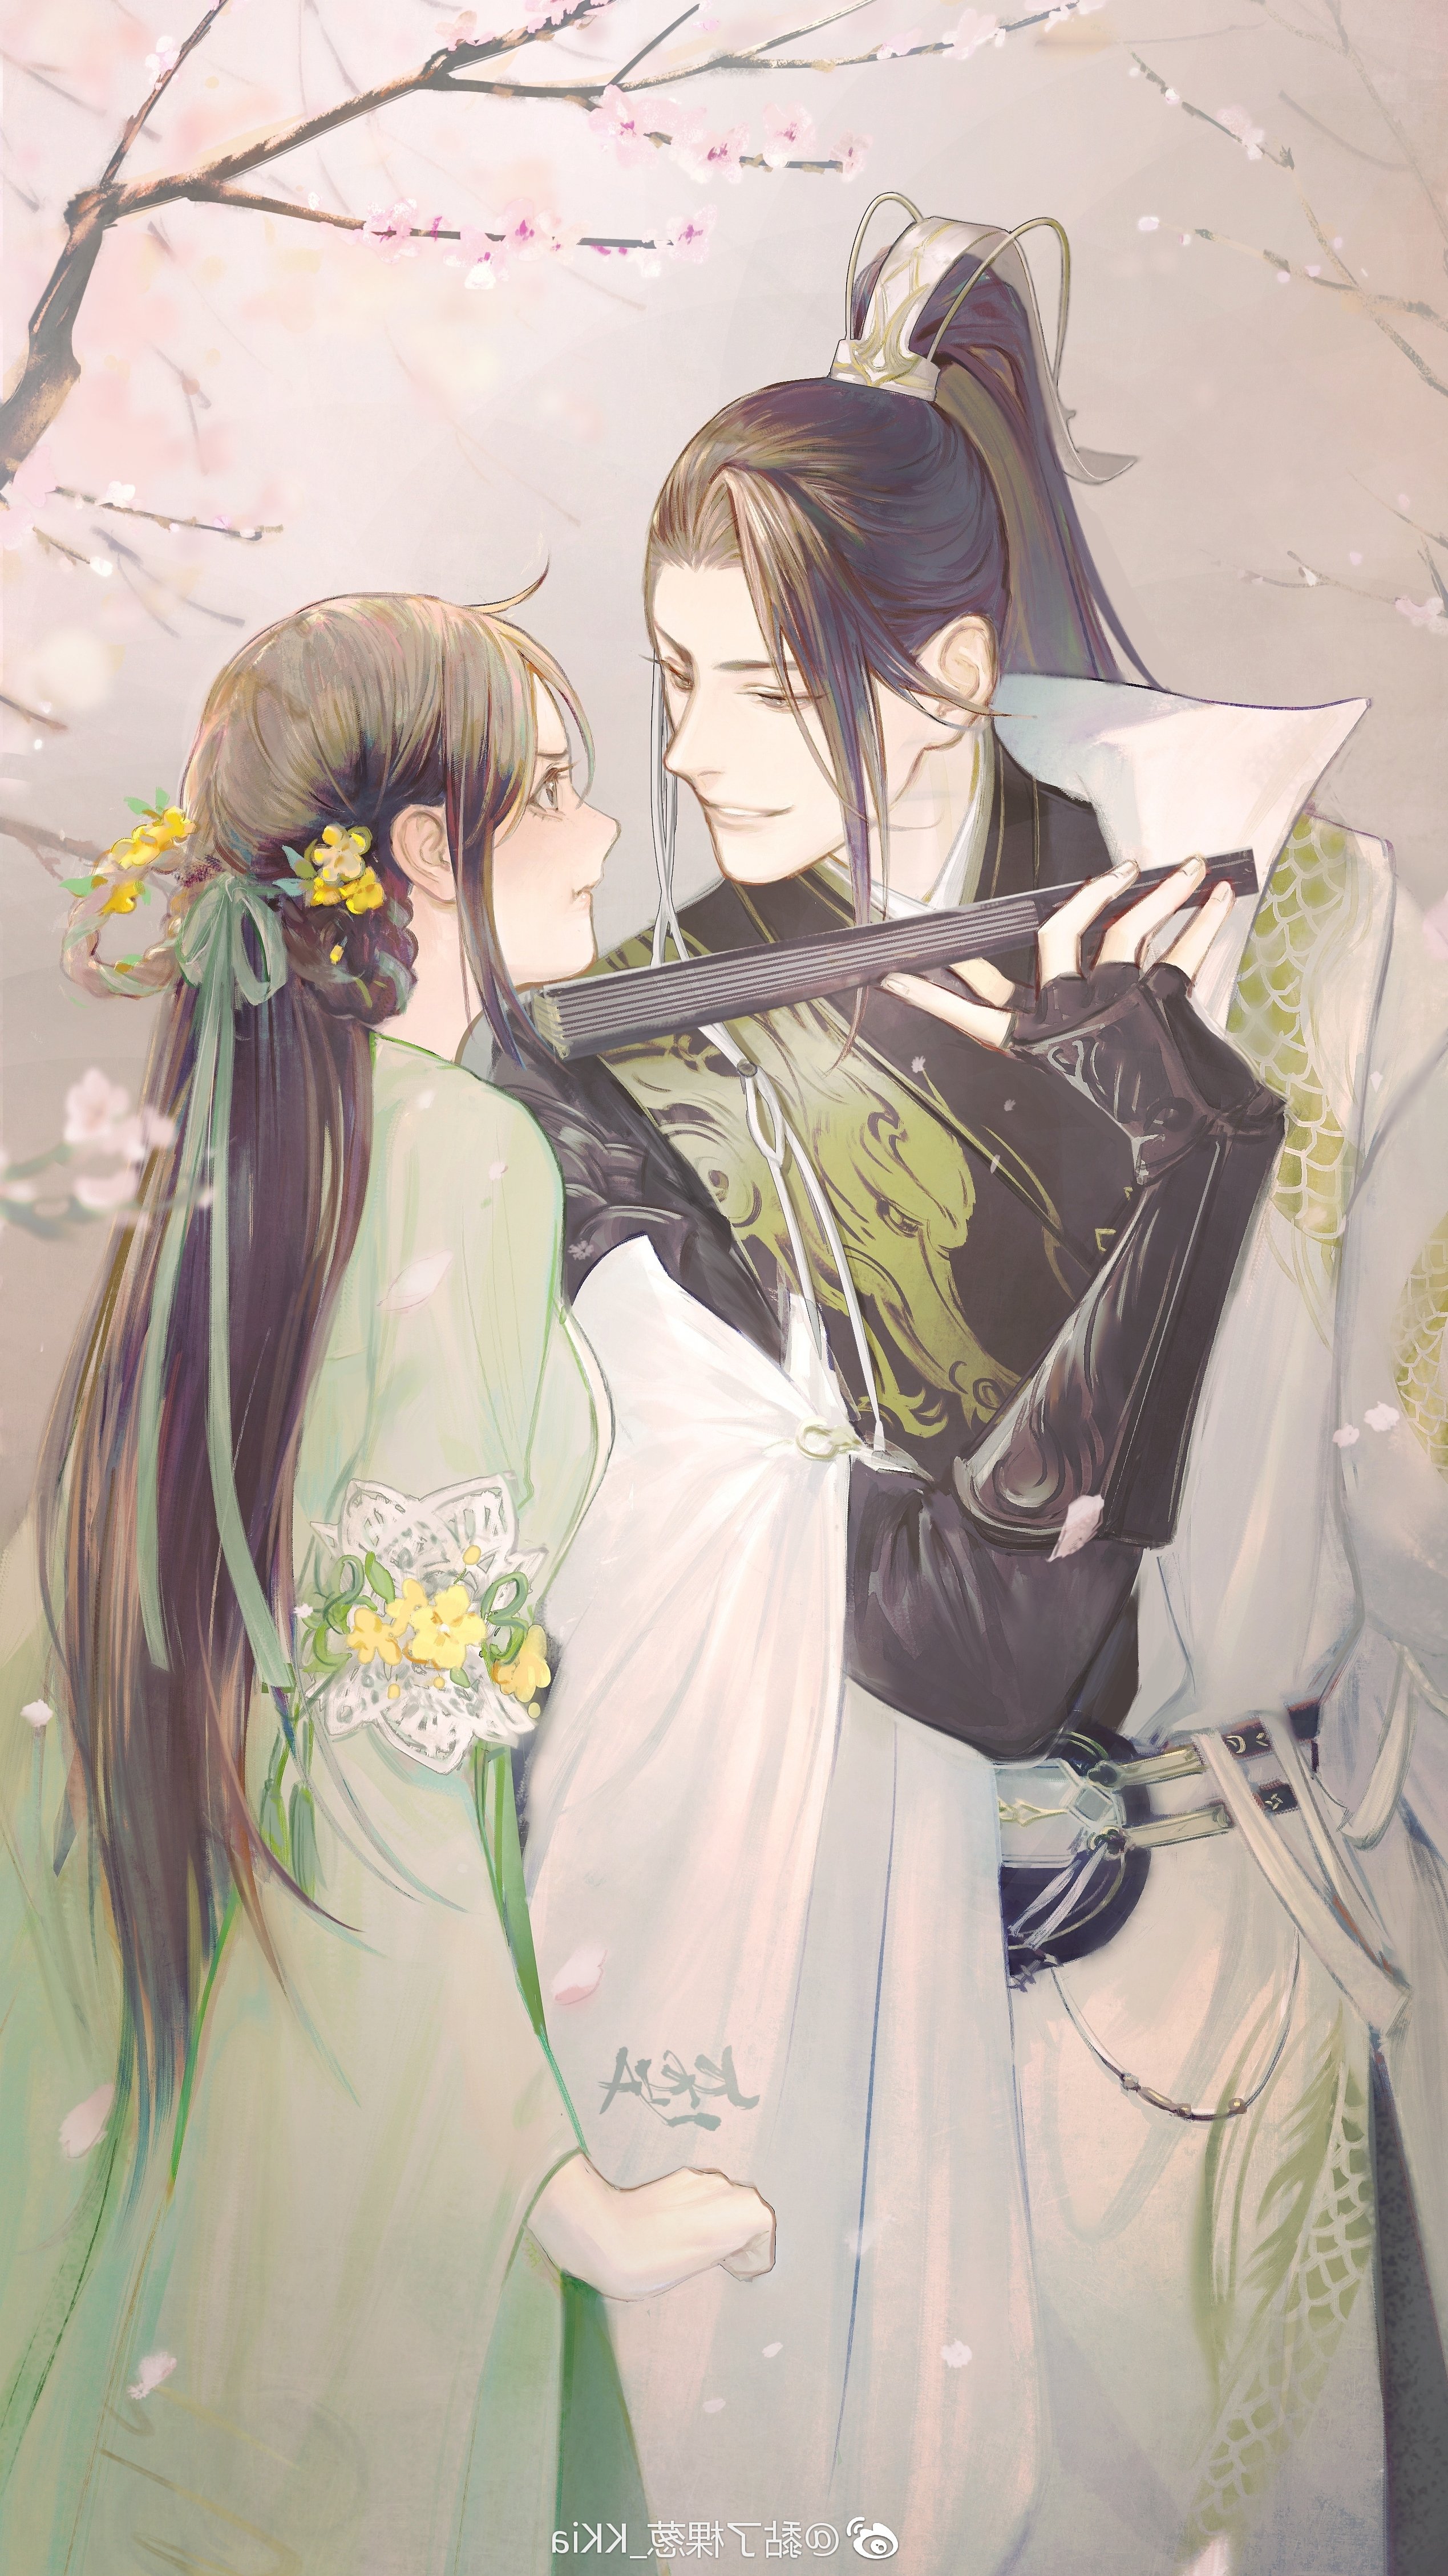 Wallpaper Romance, Chinese Clothes, Cherry Blossom, Anime Couple:2538x4516